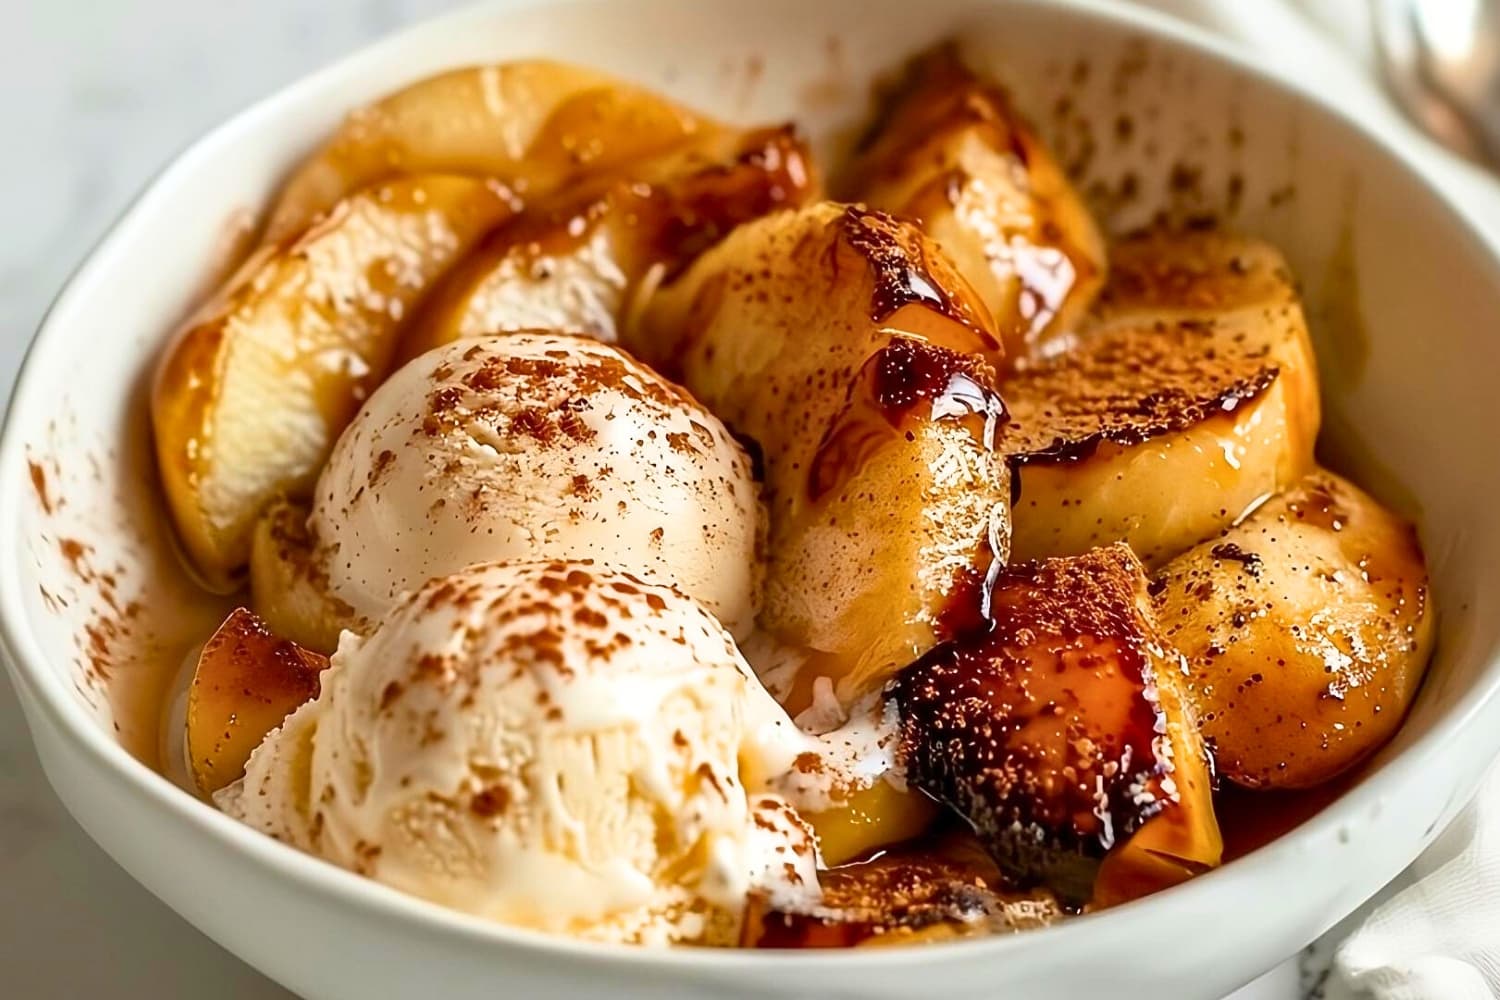 Baked apple slices served with vanilla ice cream on a white bowl.